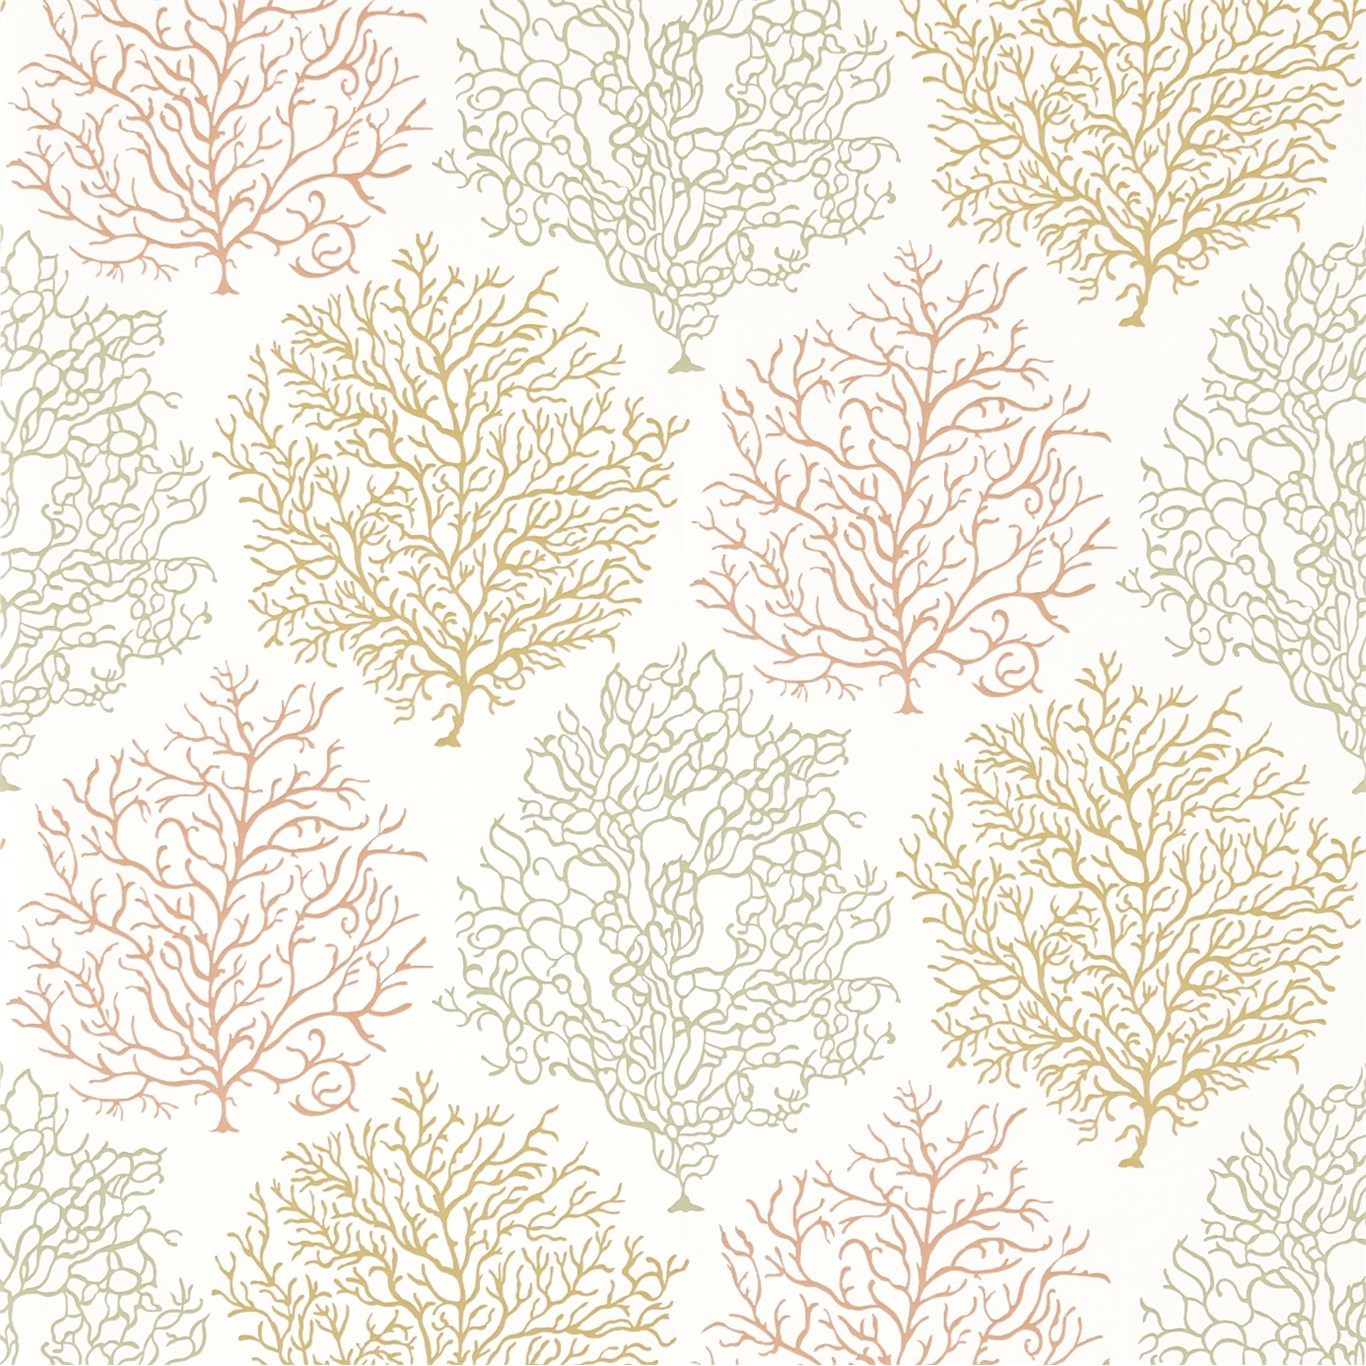 Wallpaper - Sanderson Voyage of Discovery Coral Reef Amber/Russet